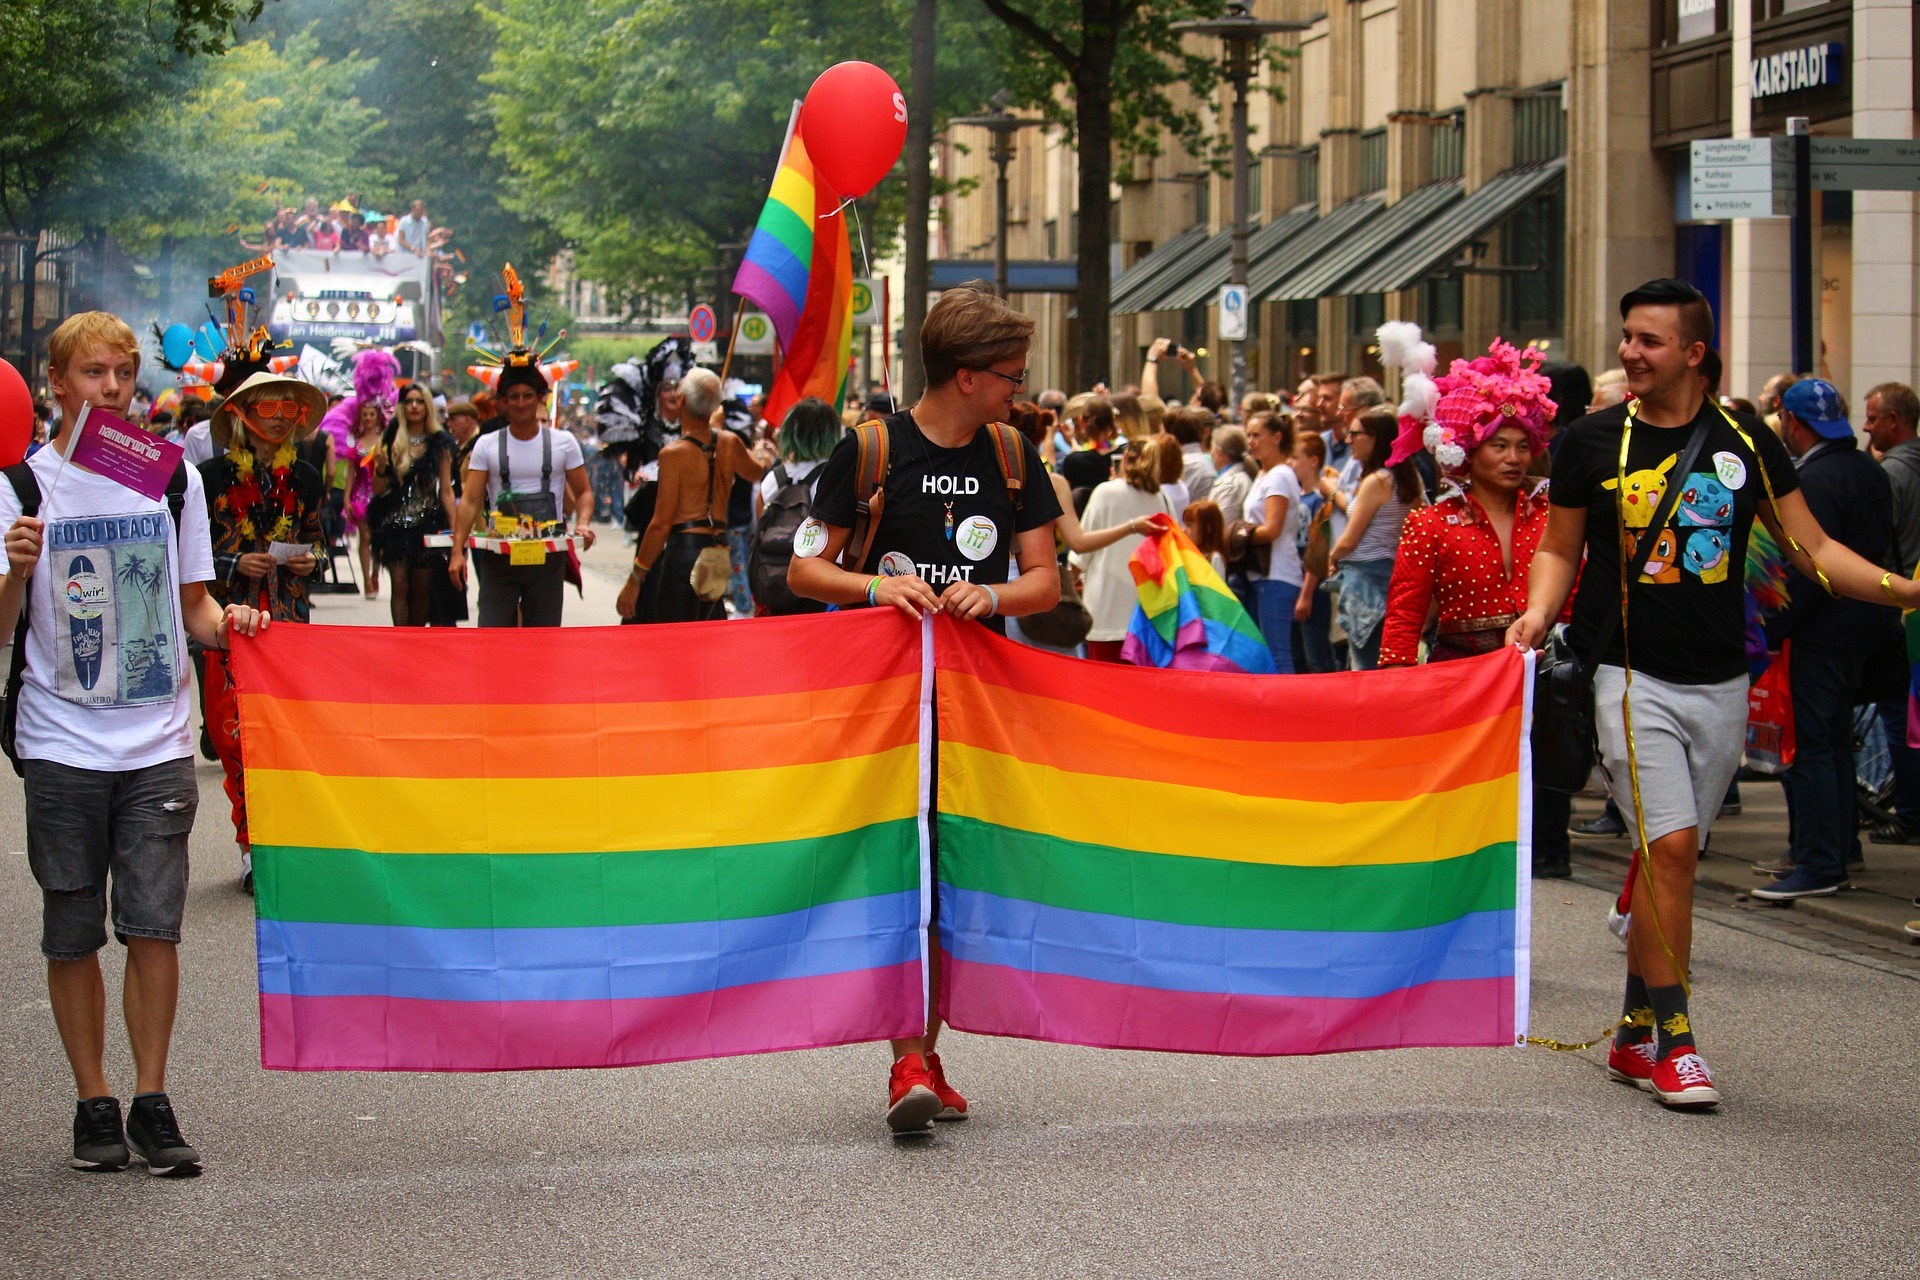 Three Men holding a rainbow flag followed by a group of people during a Pride parade.